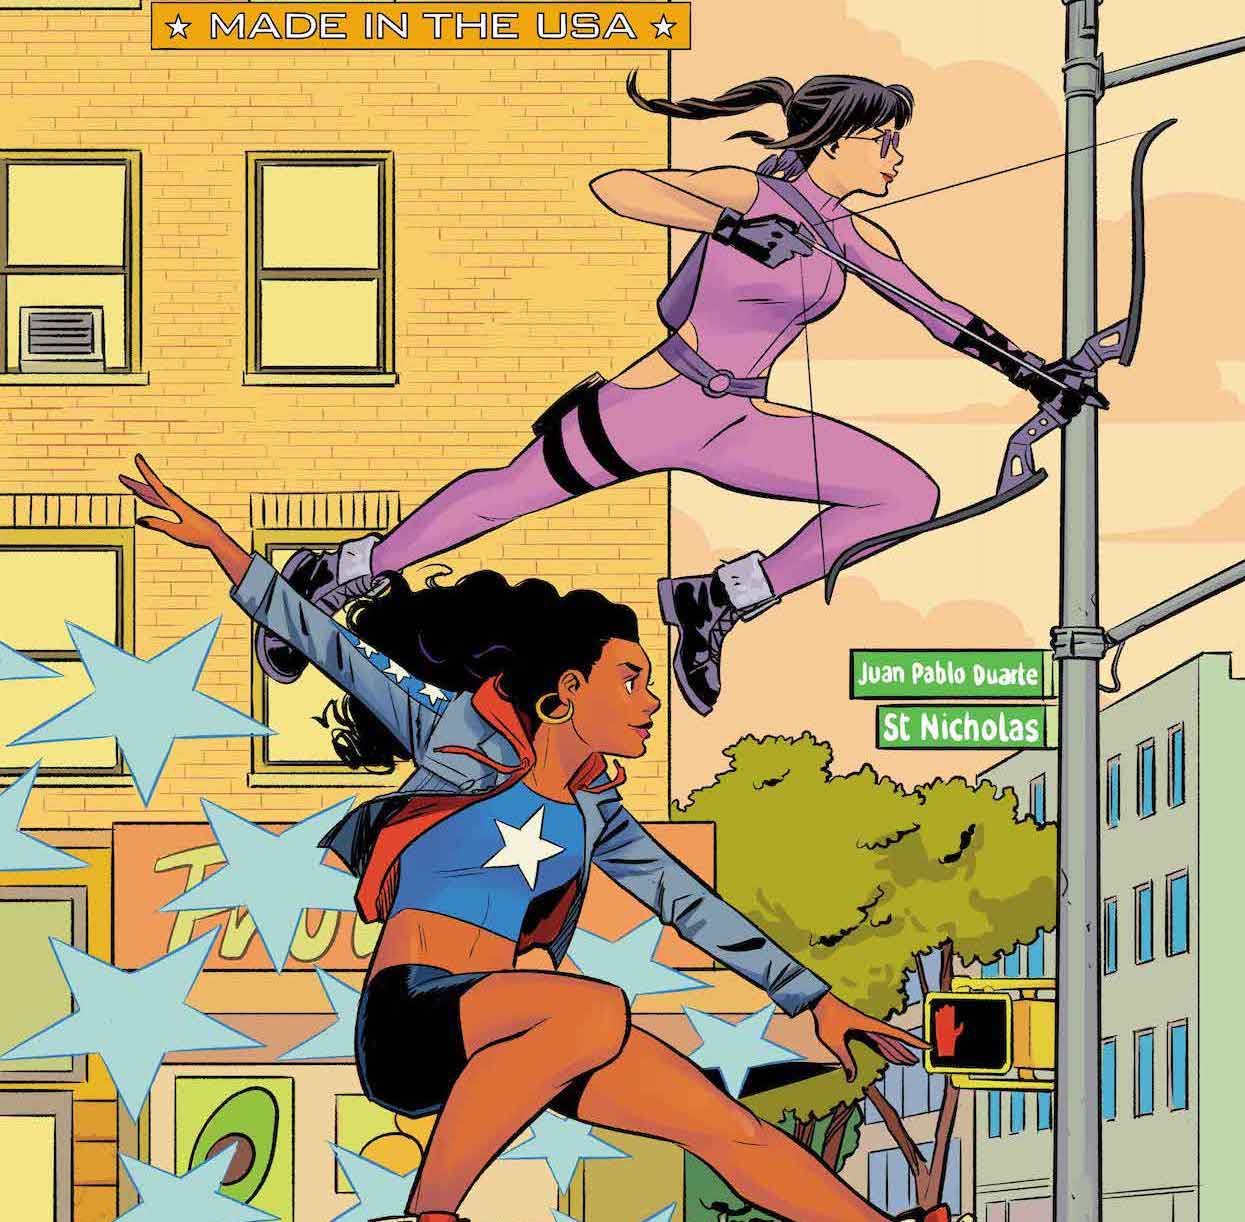 Marvel teases new origin reveals in 'America Chavez: Made in the USA' #4